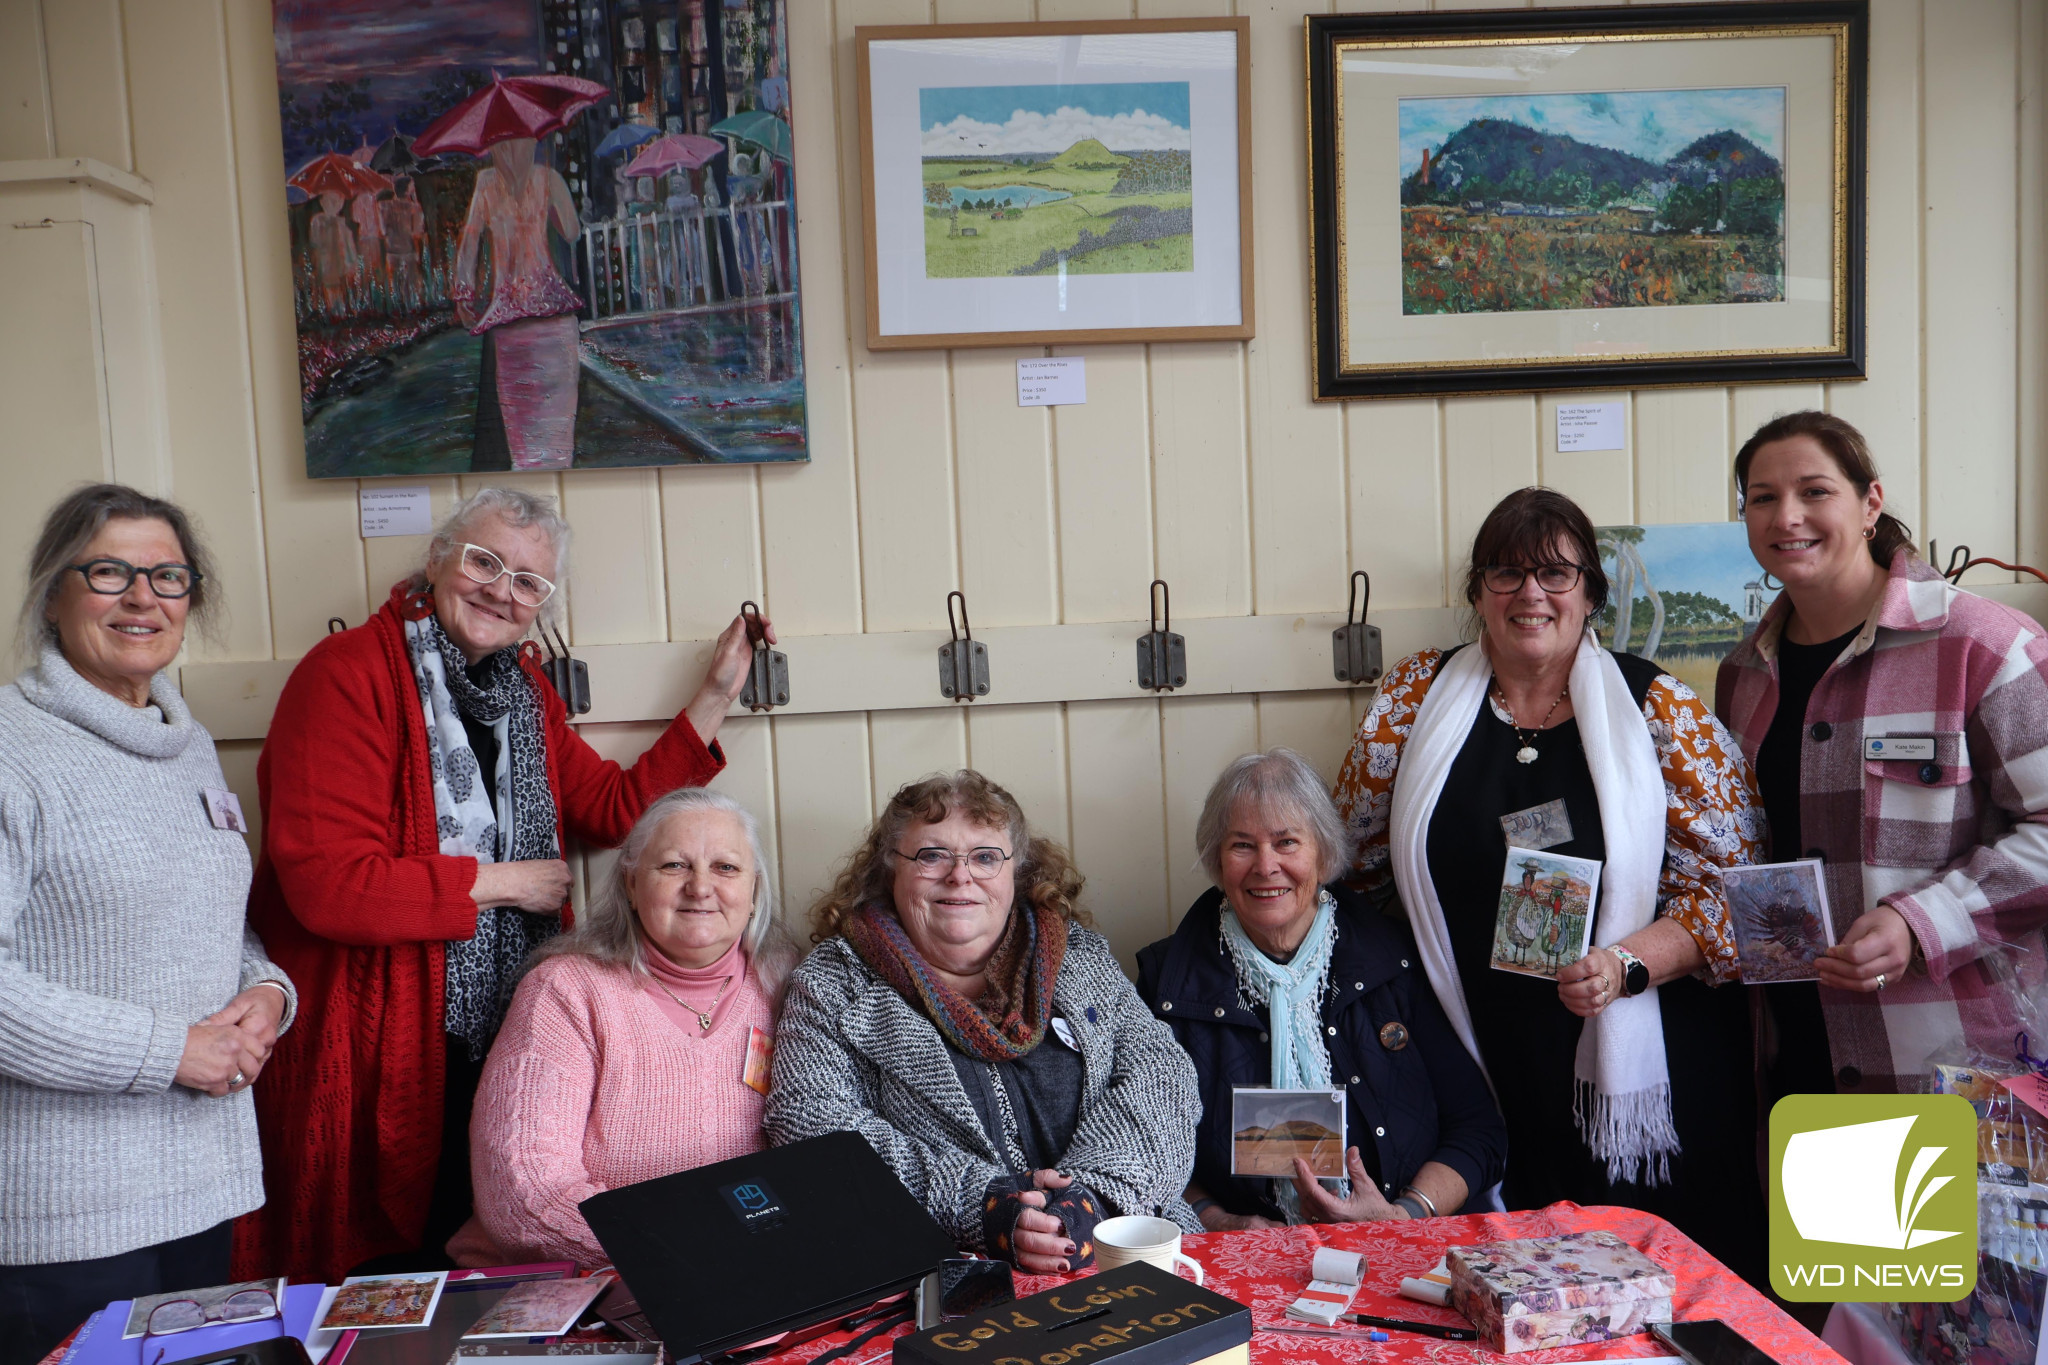 Art on show: Artists Jan Barnes, Isha Paasse, Lydia Green, Sue Hollingsworth, Joan Mahony and Judy Armstrong opened their annual exhibition alongside Corangamite Shire Council mayor Kate Makin last weekend.